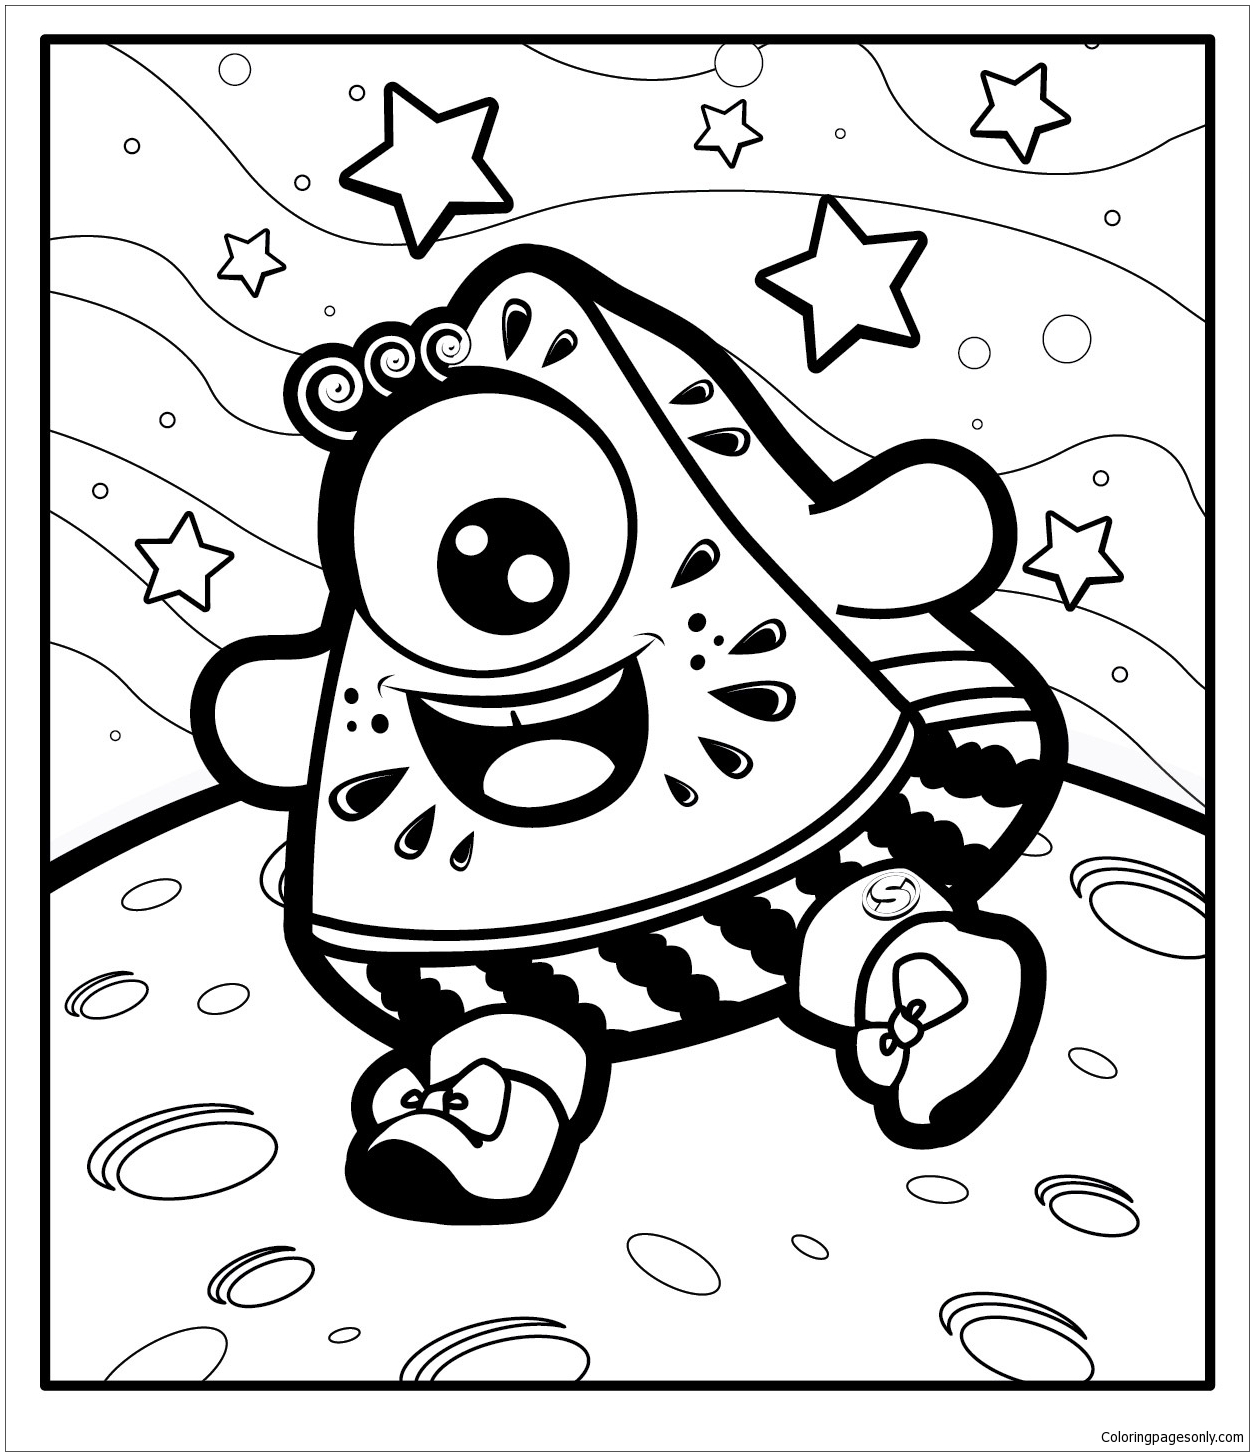 Funny Characters Coloring Pages   Funny Coloring Pages   Coloring ...